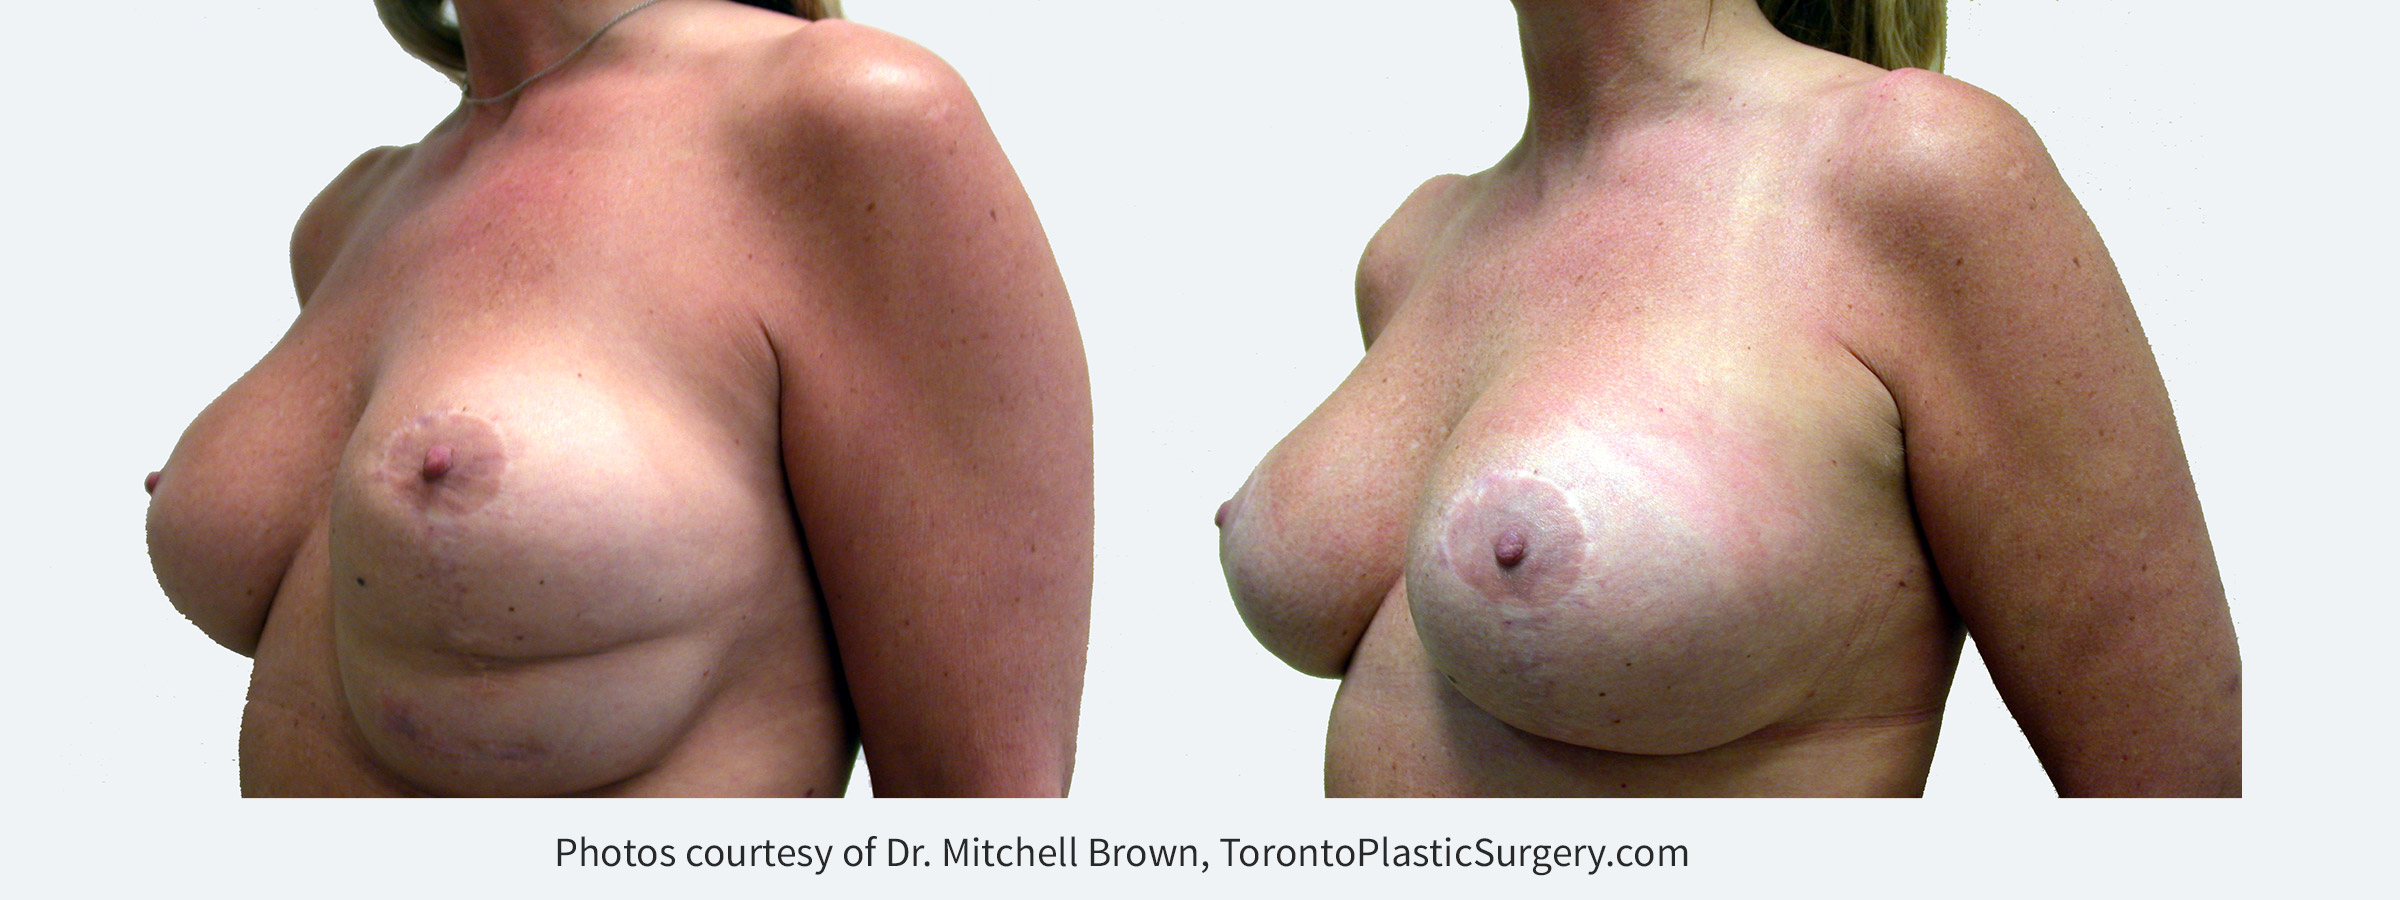 Inferior malposition of the left implant (implant too low) due to excessive release of the inframammary fold following breast augmentation and breast lift. The patient had several failed corrections. Left implant position corrected with internal sutures of the fold and insertion of an internal support matrix. Before and 6 months after